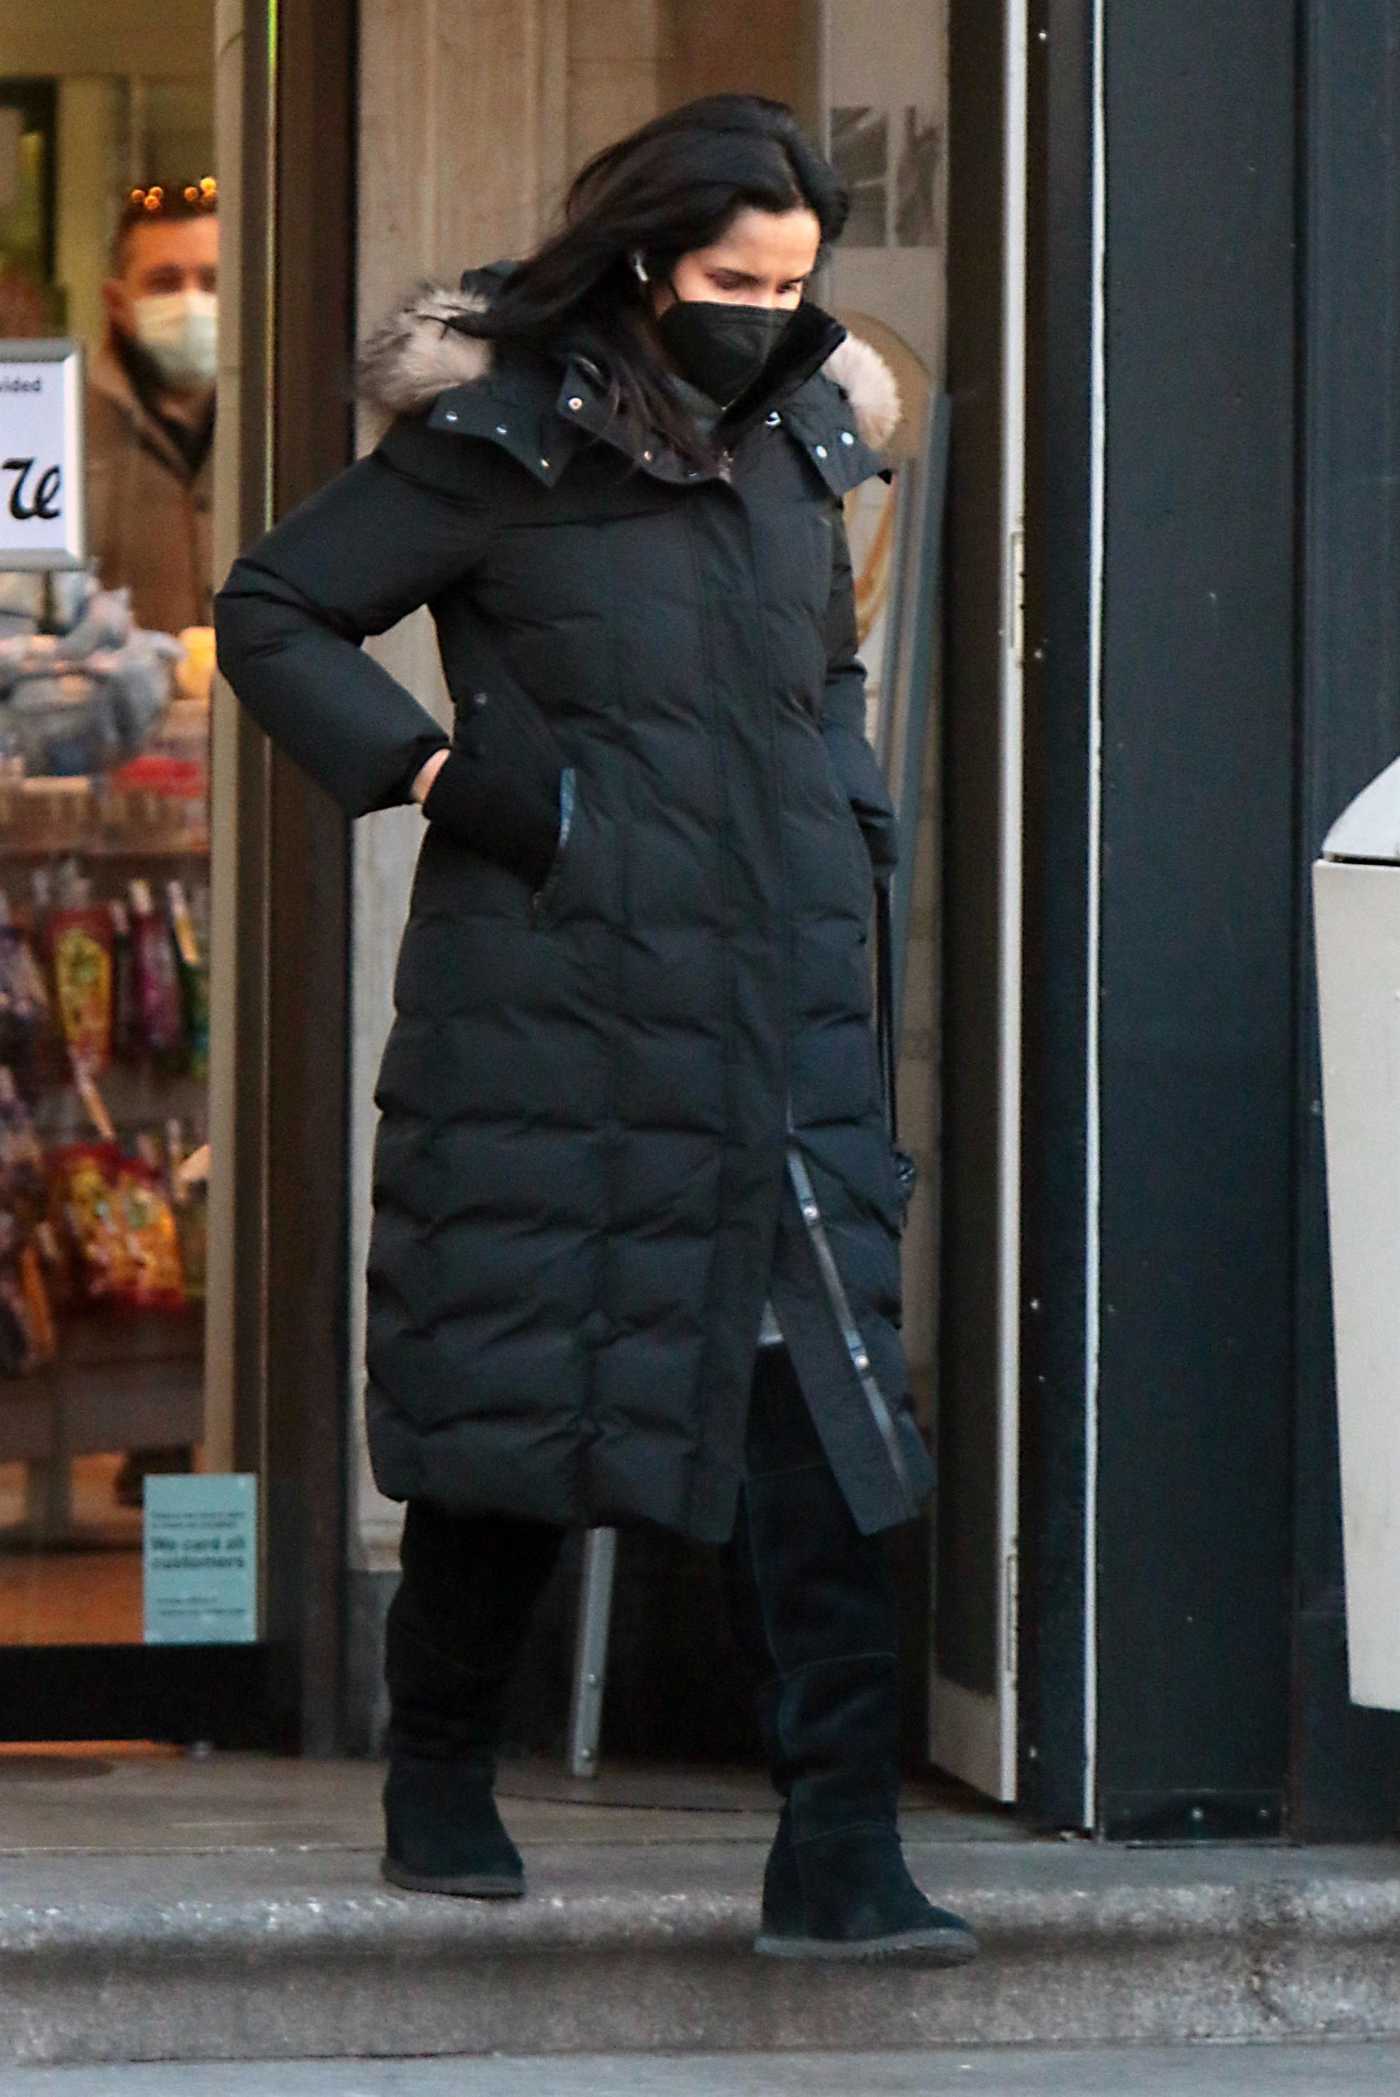 Padma Lakshmi in a Black Puffer Coat Was Seen Out in New York 01/27/2022